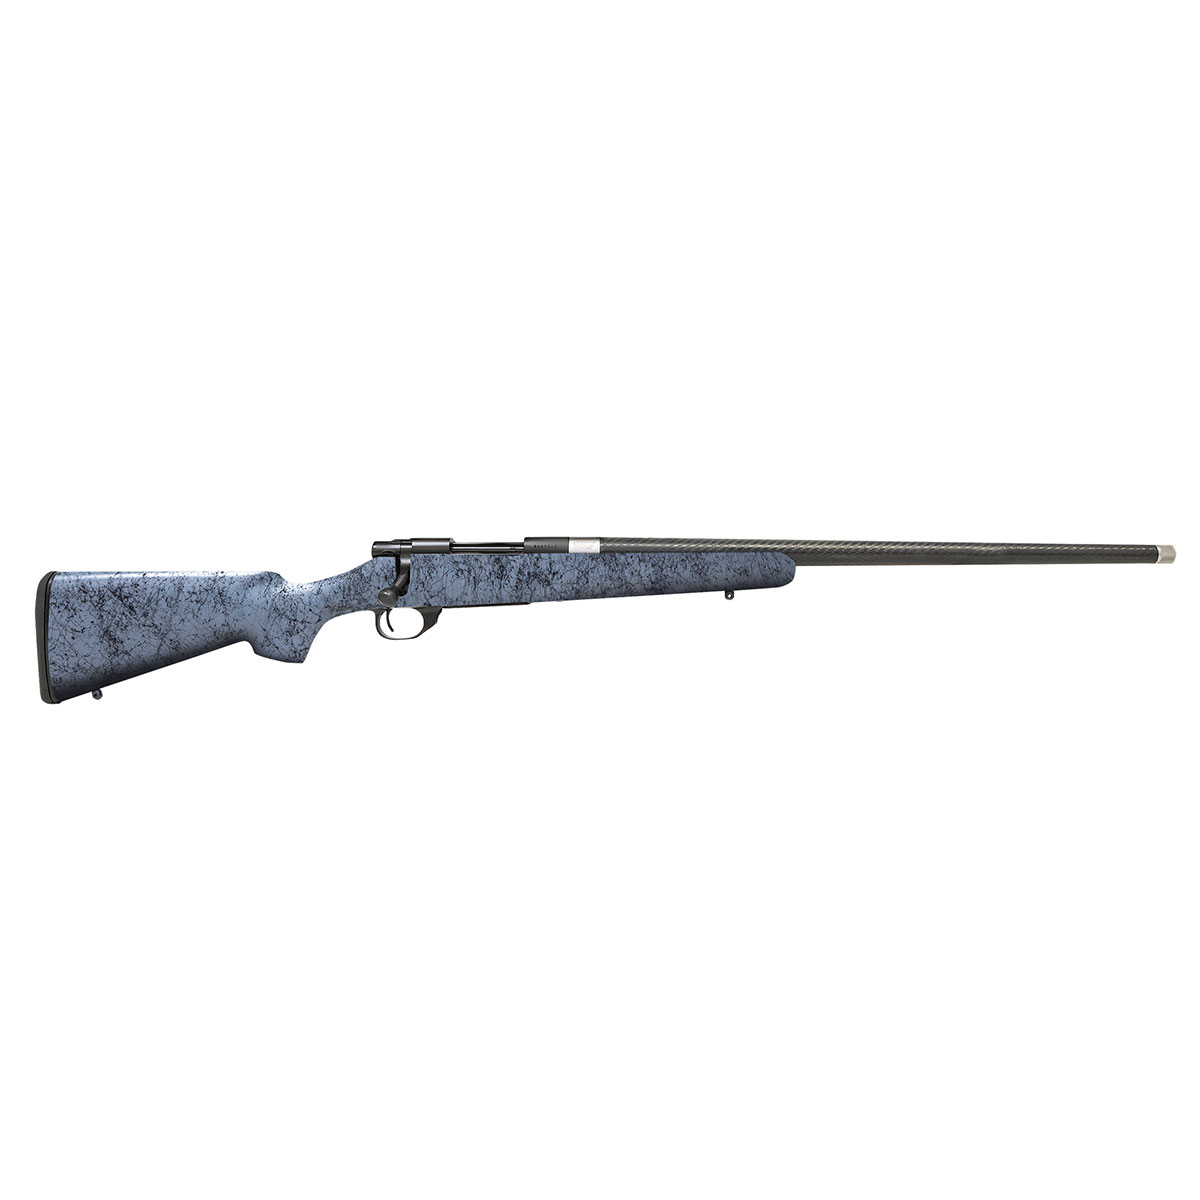 HOWA - M1500 CARBON ELEVATE 308 WINCHESTER BOLT-ACTION RIFLE